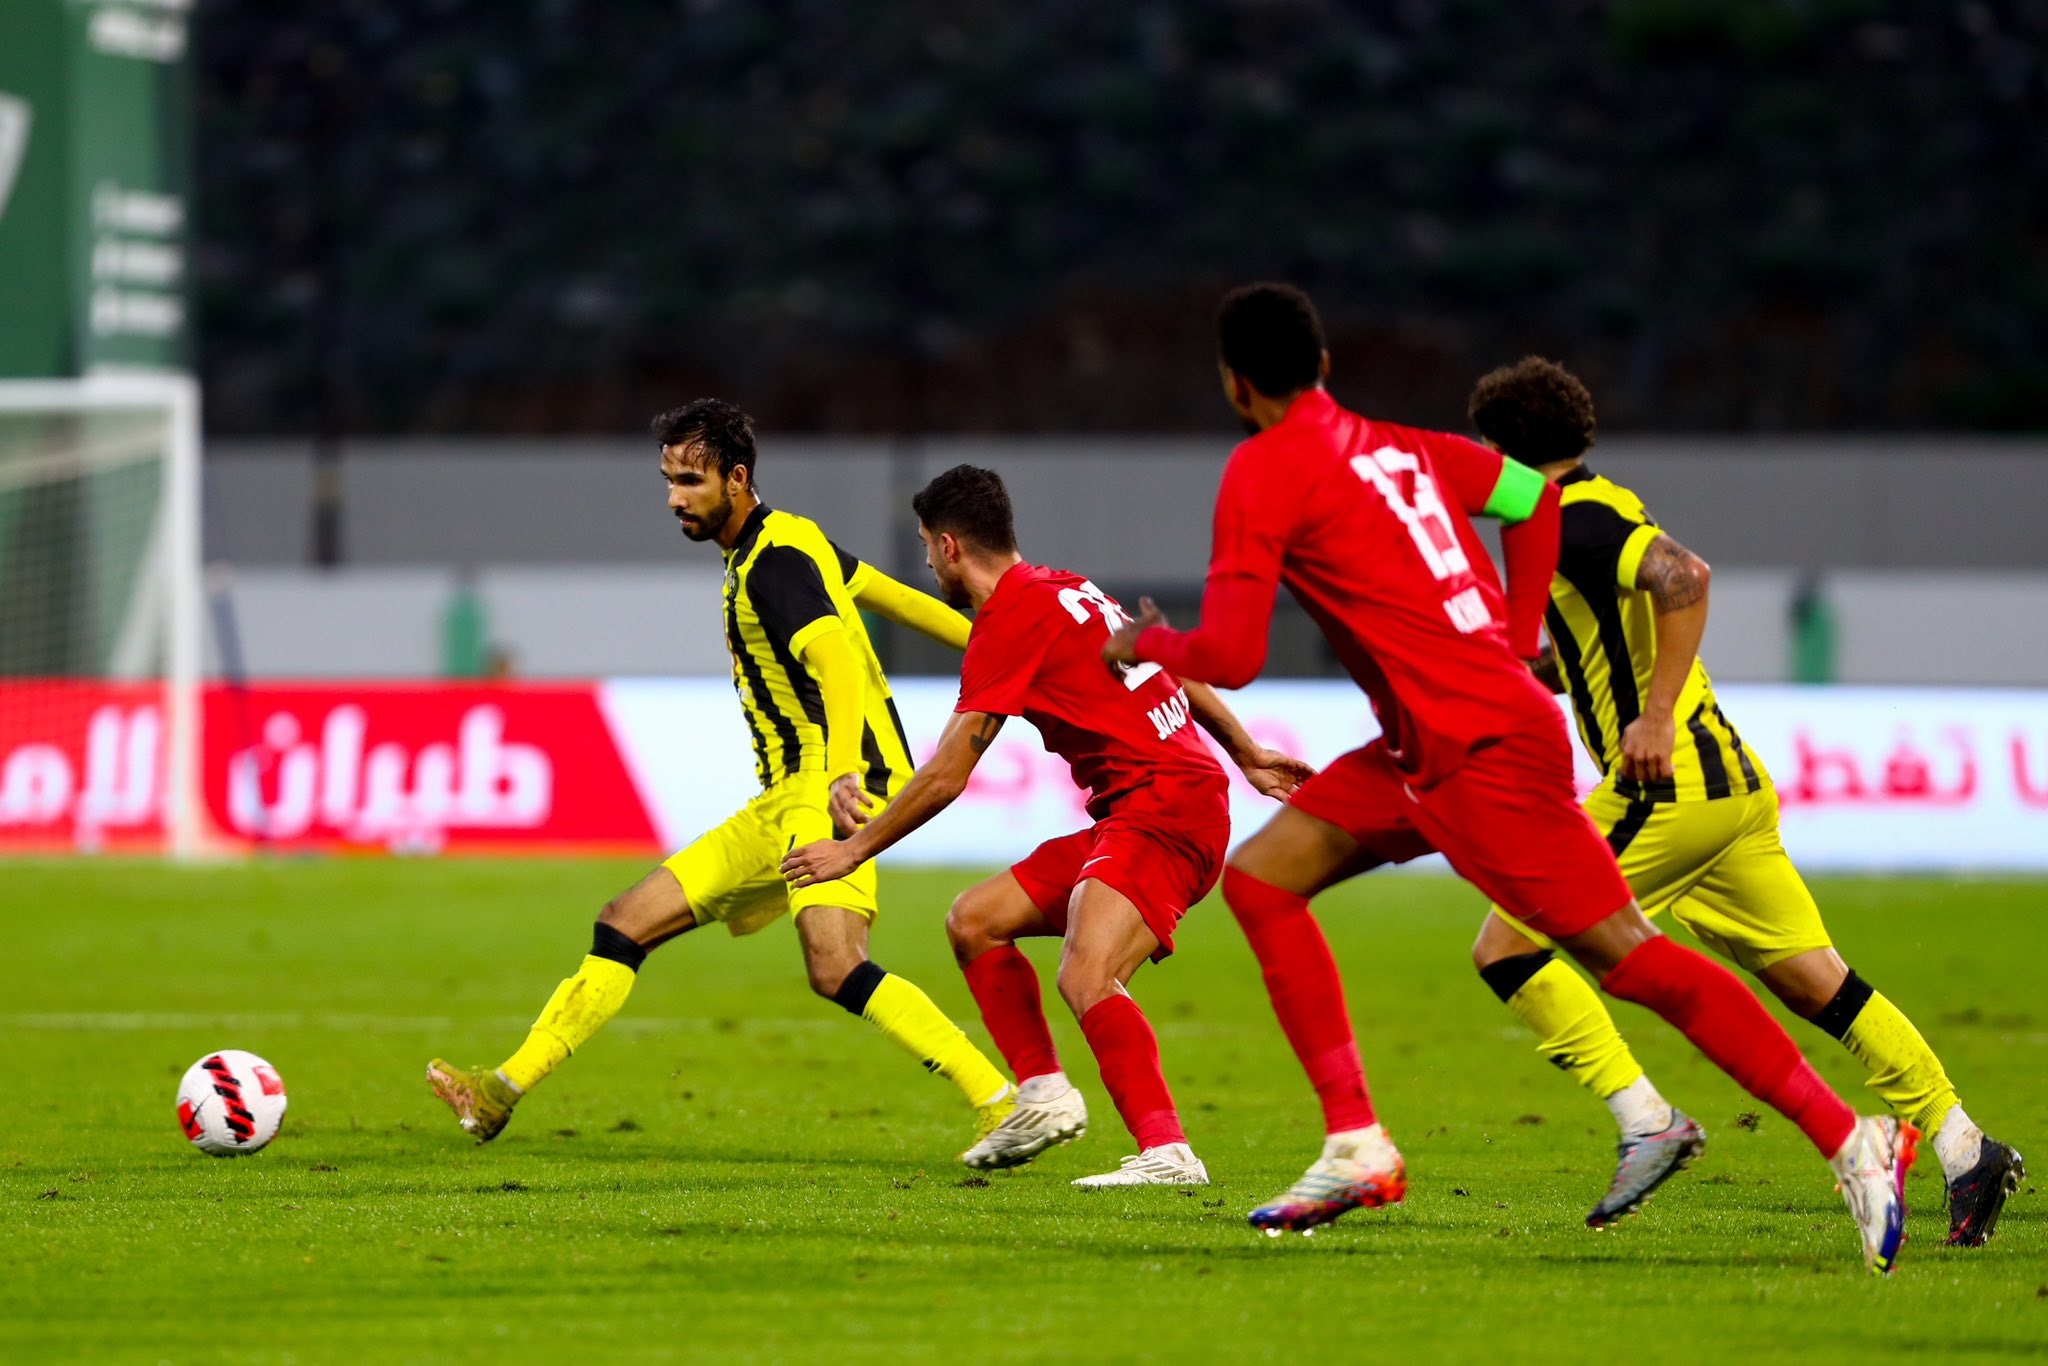 Video technology gives Al-Bataeh two penalties to tie Kalba